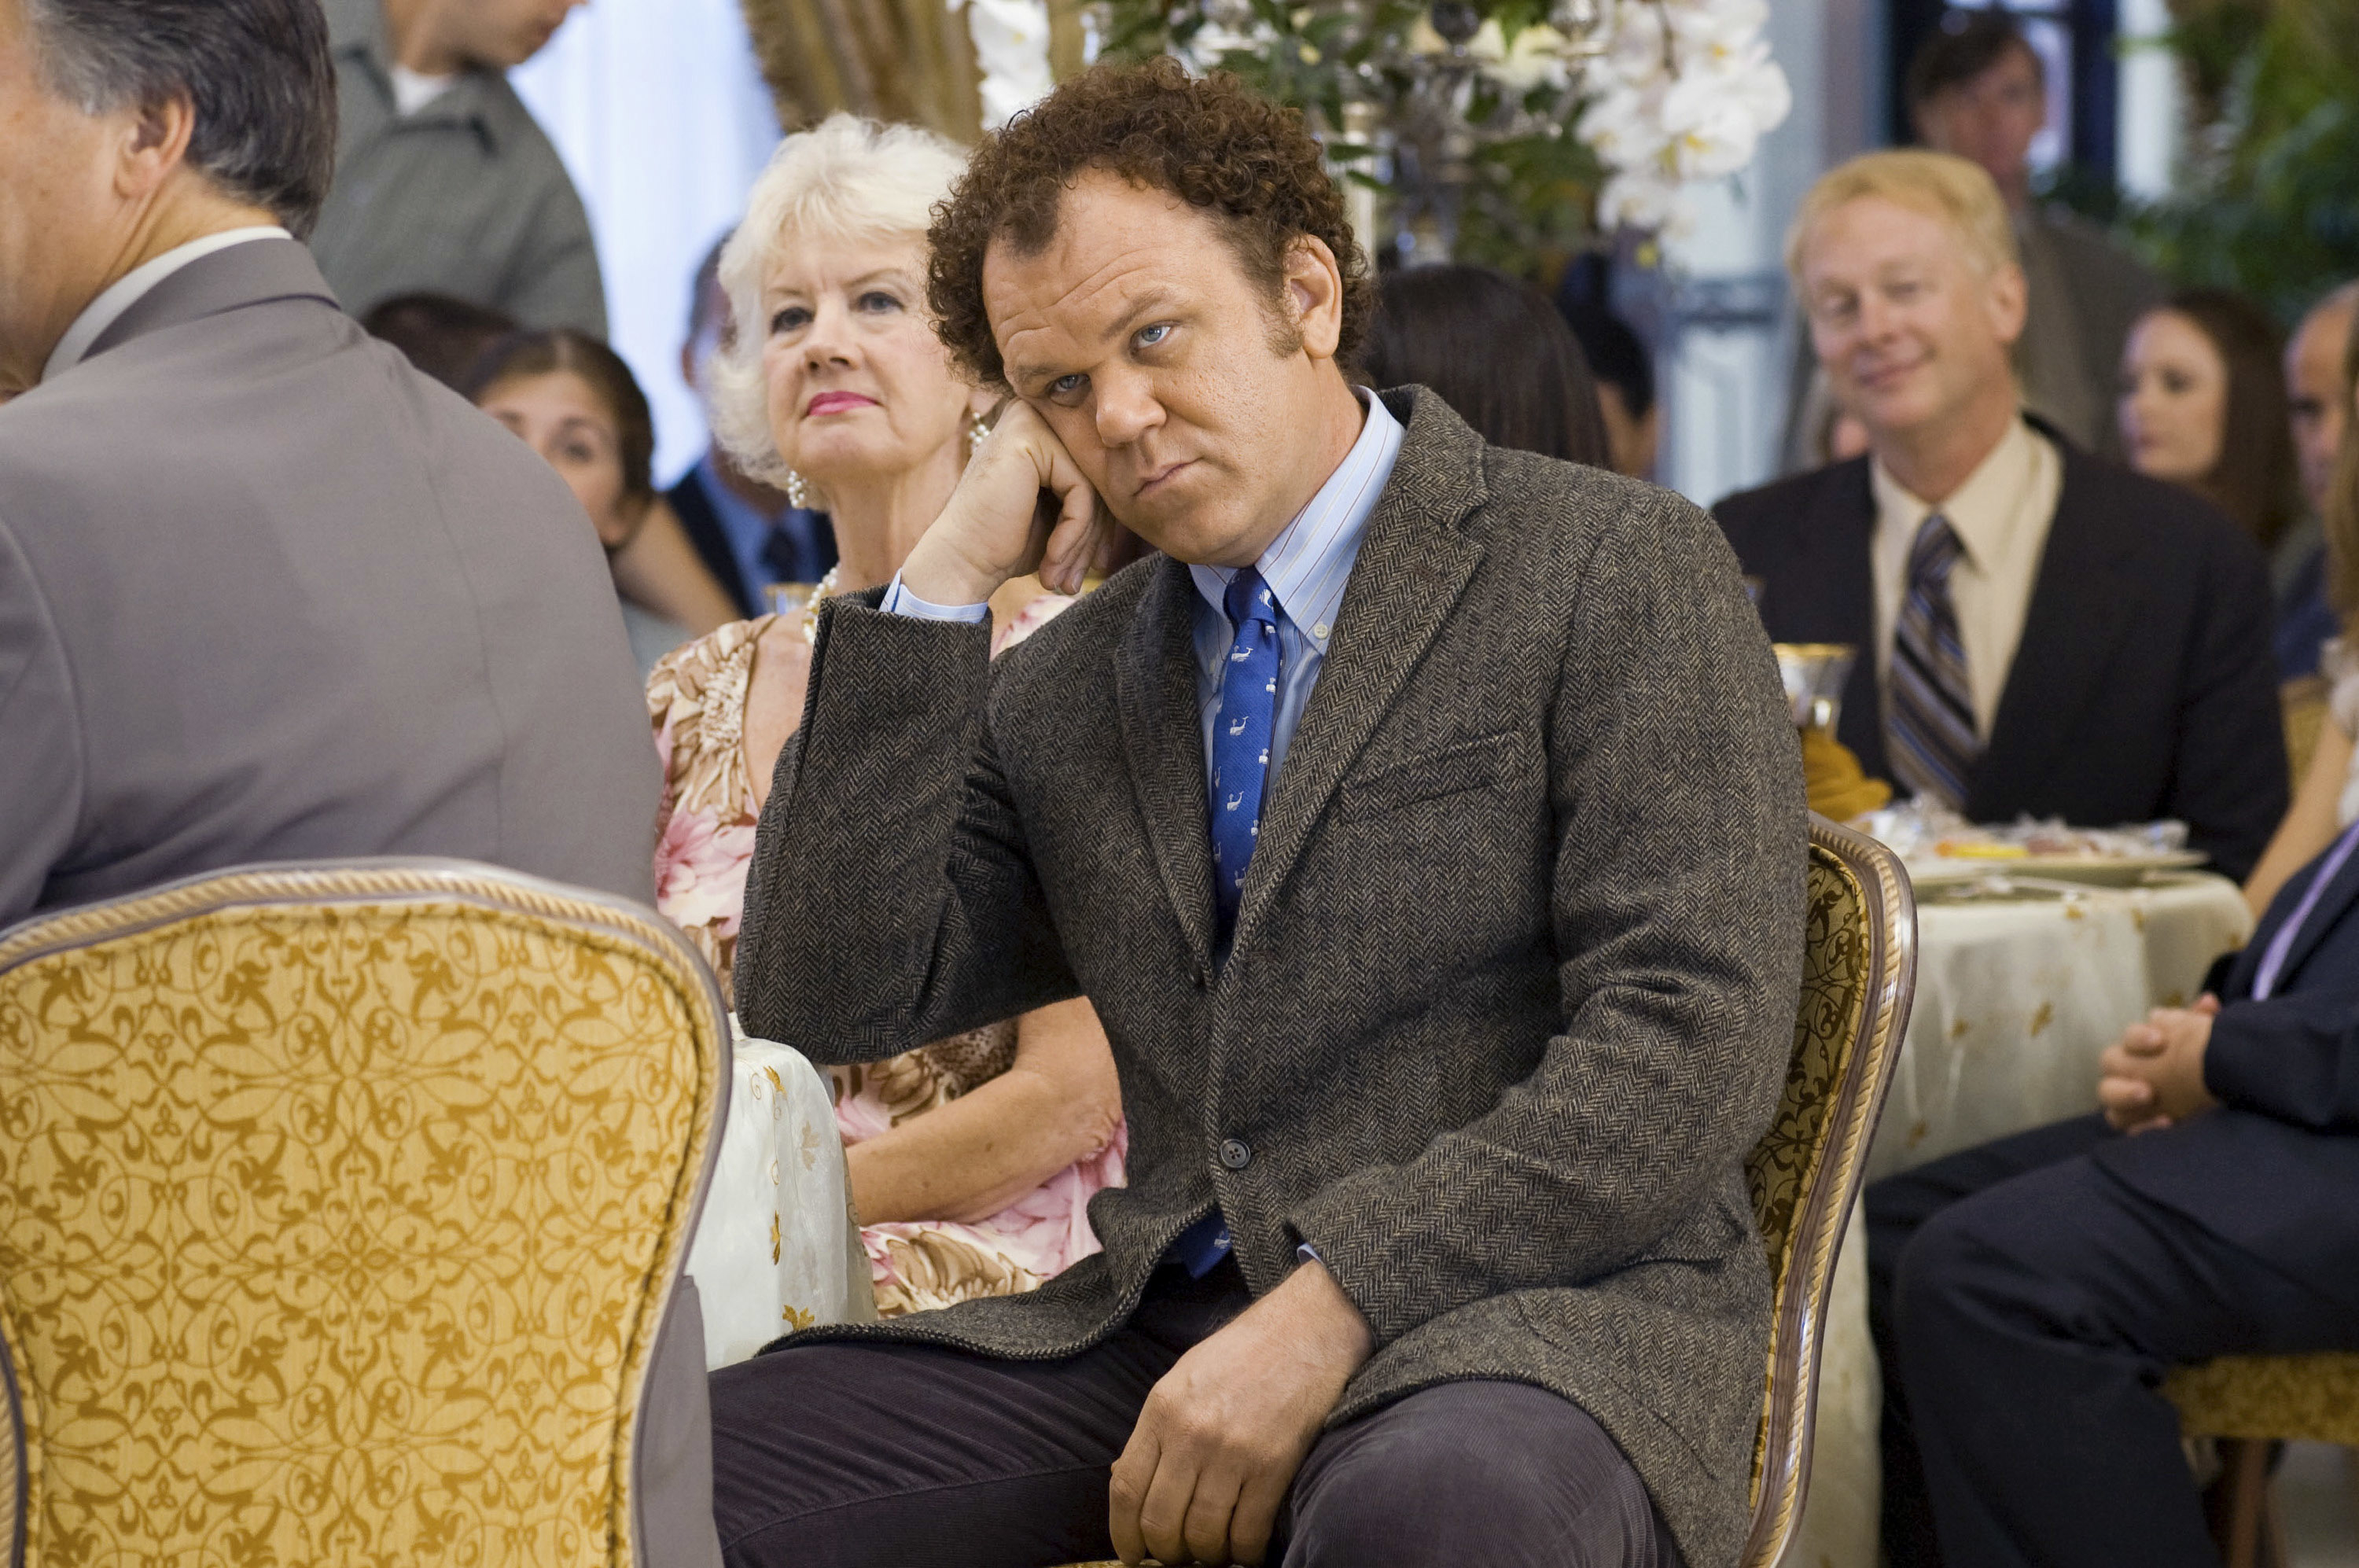 John C. Reilly, seated in a formal setting, looking directly at the camera while resting his head on his hand. Others in formal attire are in the background